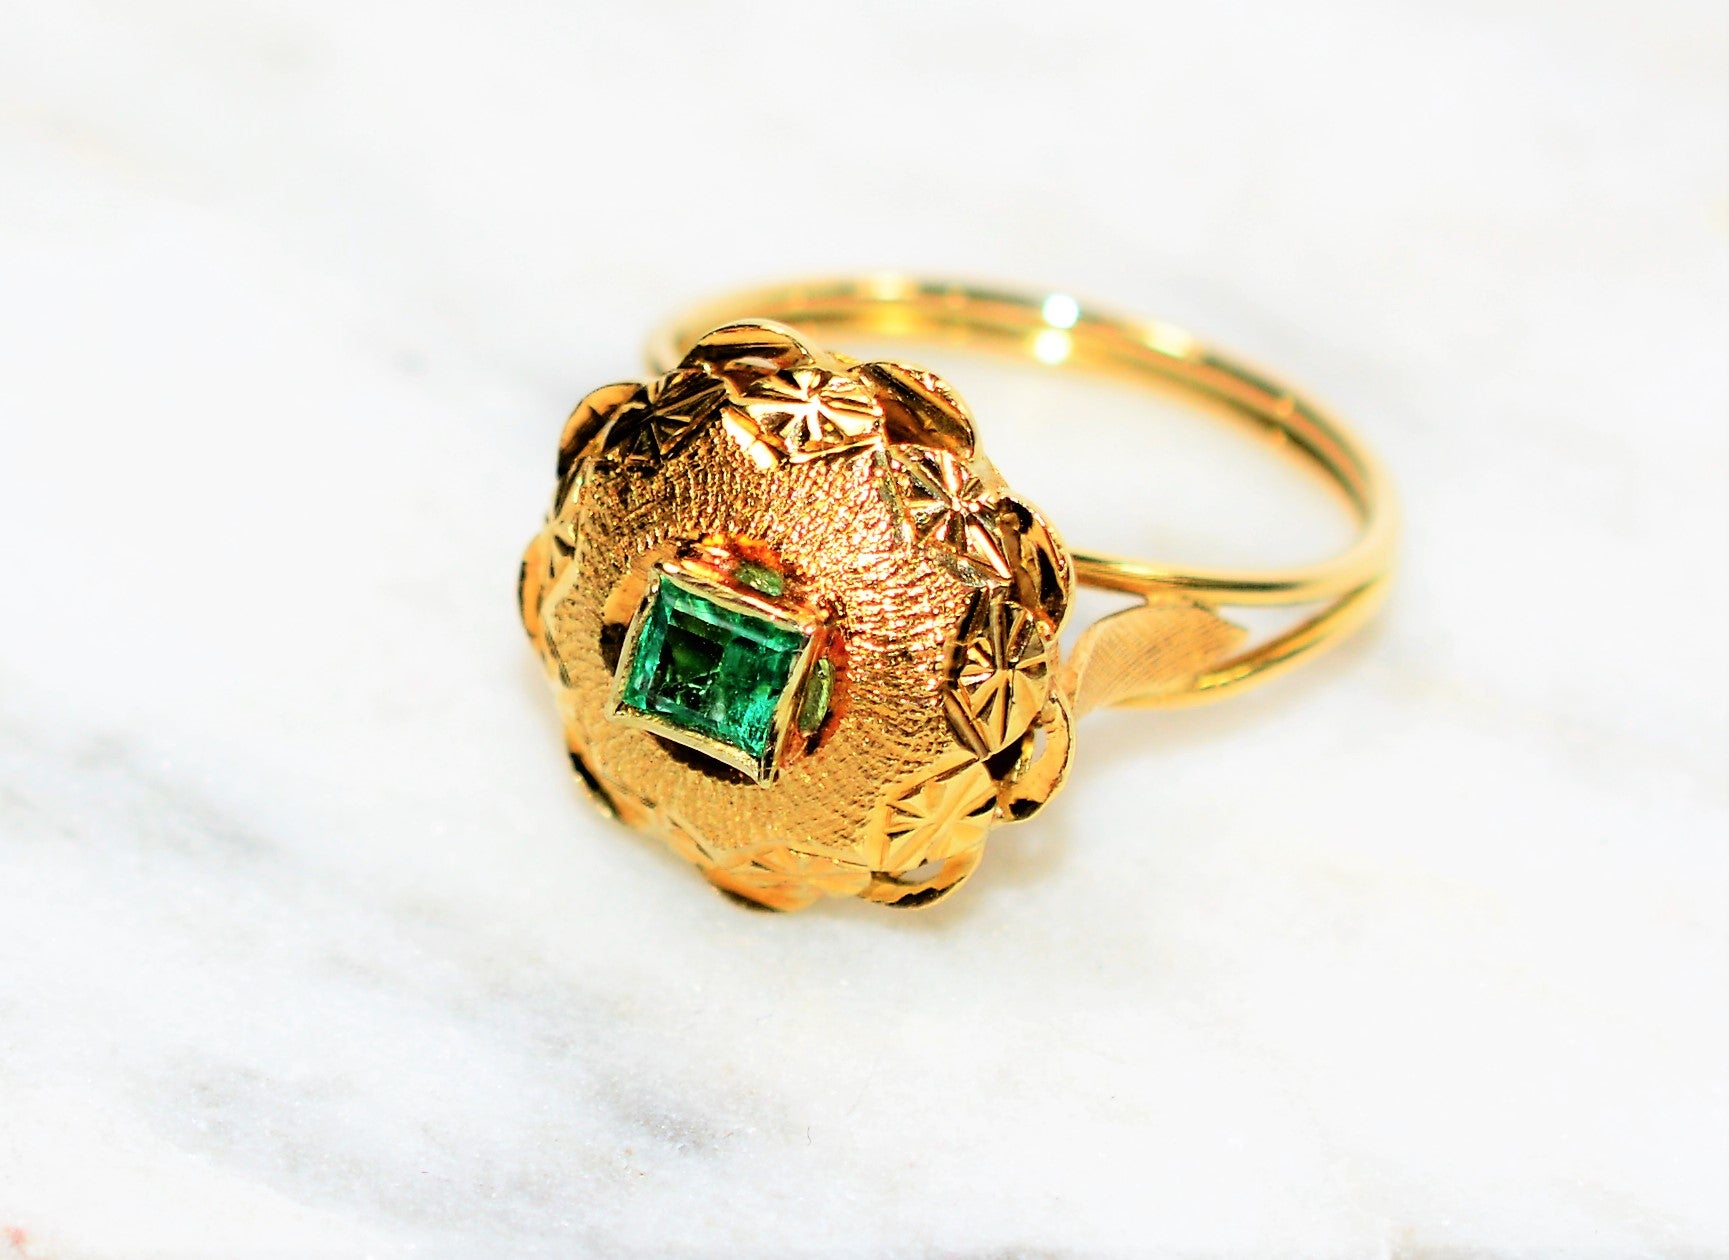 Natural Colombian Emerald Ring 18K Solid Gold .28ct Solitaire Ring Gemstone Ring Vintage Ring Estate Ring May Birthstone Ring Women’s Ring